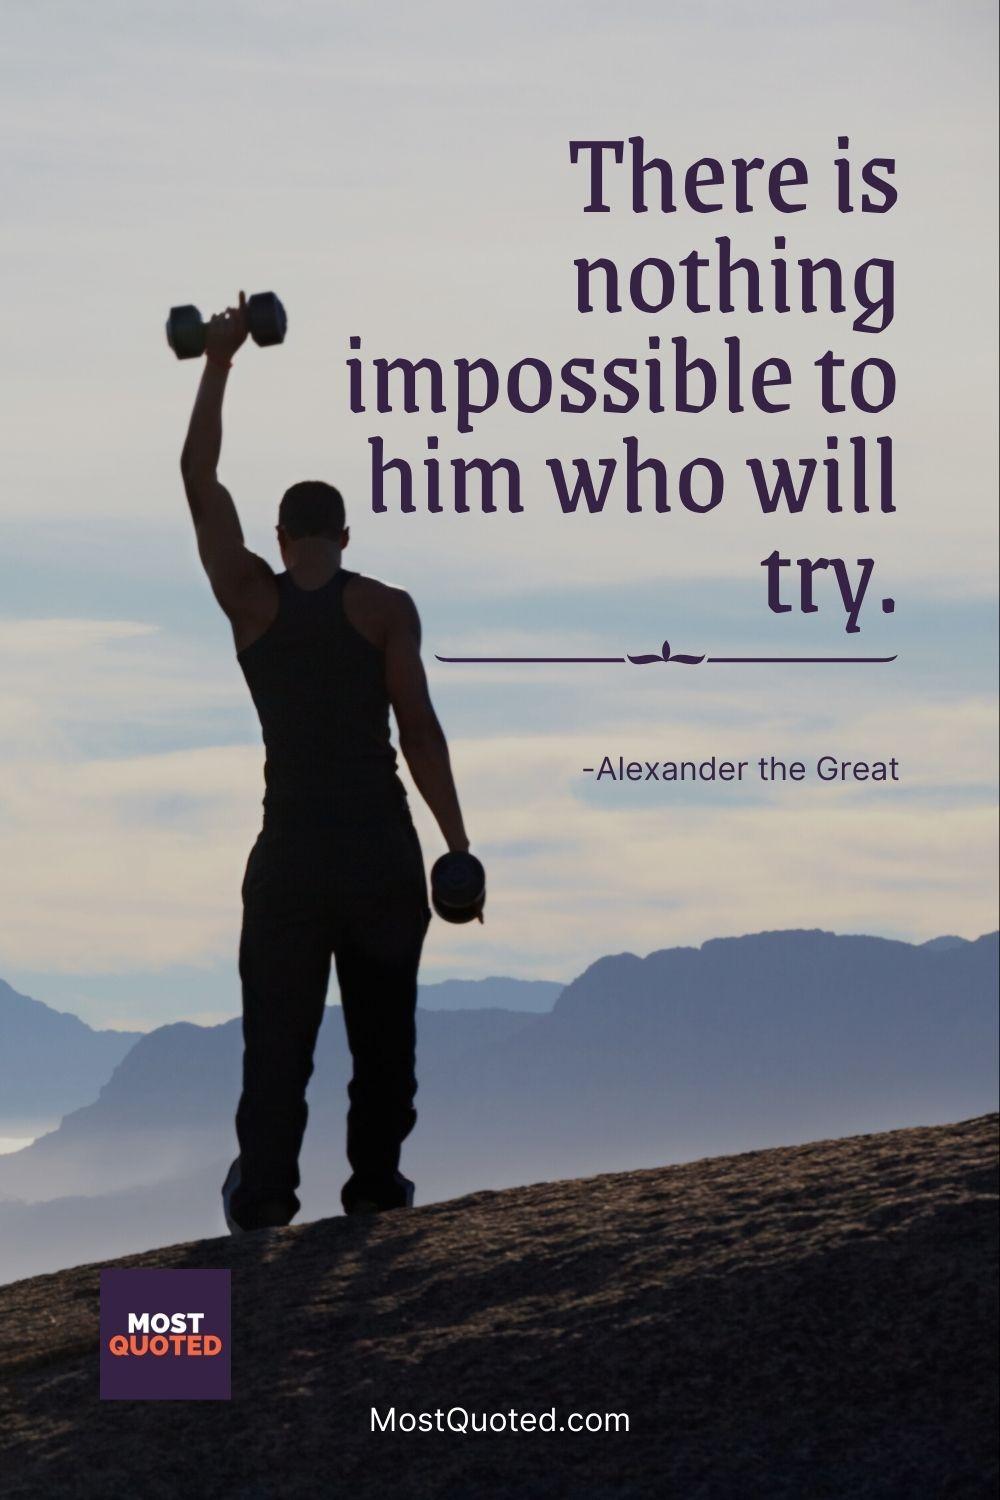 There is nothing impossible to him who will try. - Alexander the Great